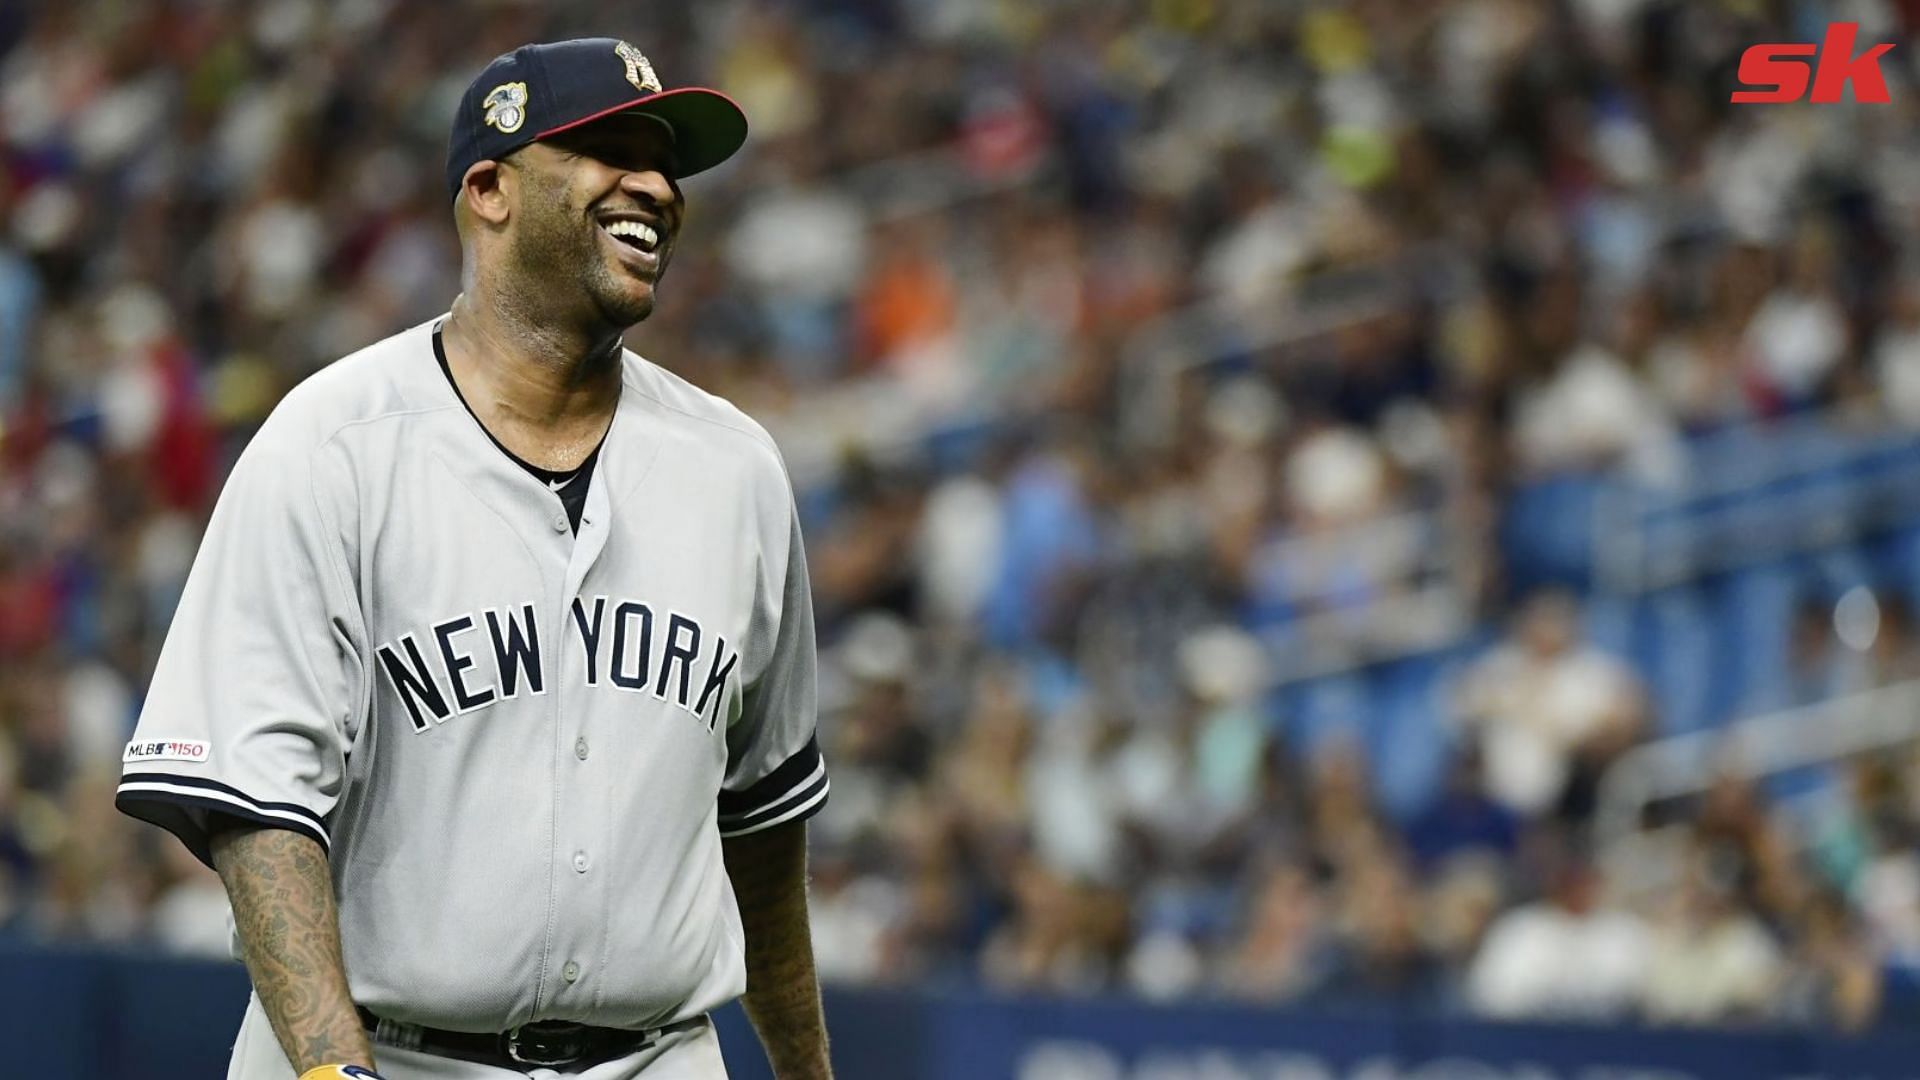 Former ace pitcher for the Yankees CC Sabathia discusses his lack of  discipline regarding his physique during his playing career